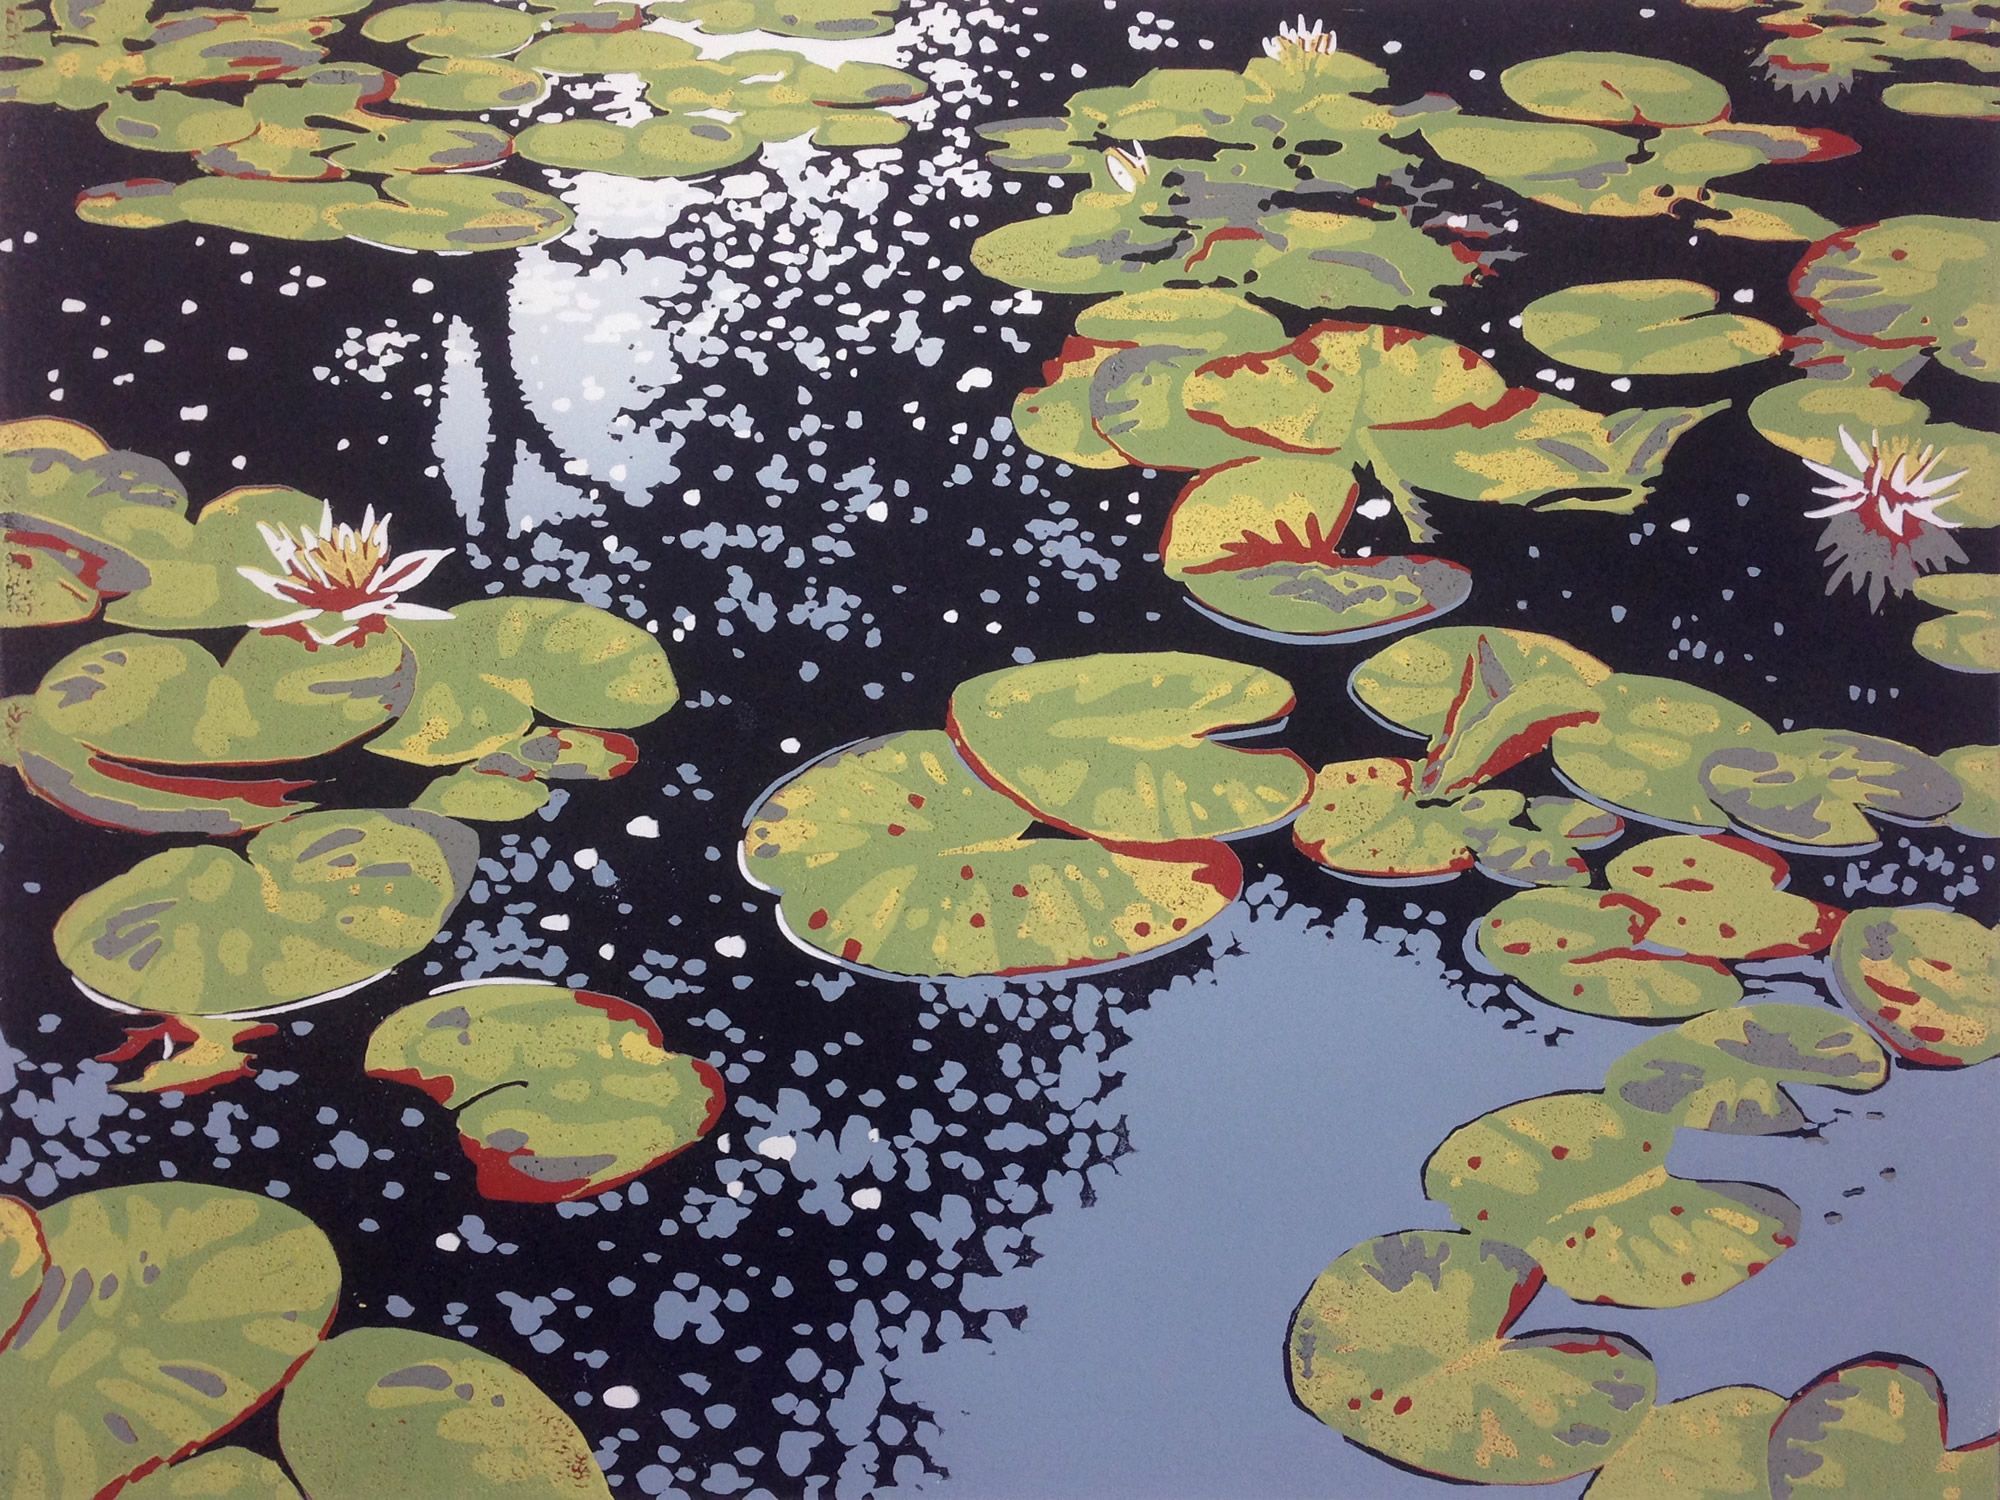 Lily Pond Reflections by Alexandra Buckle